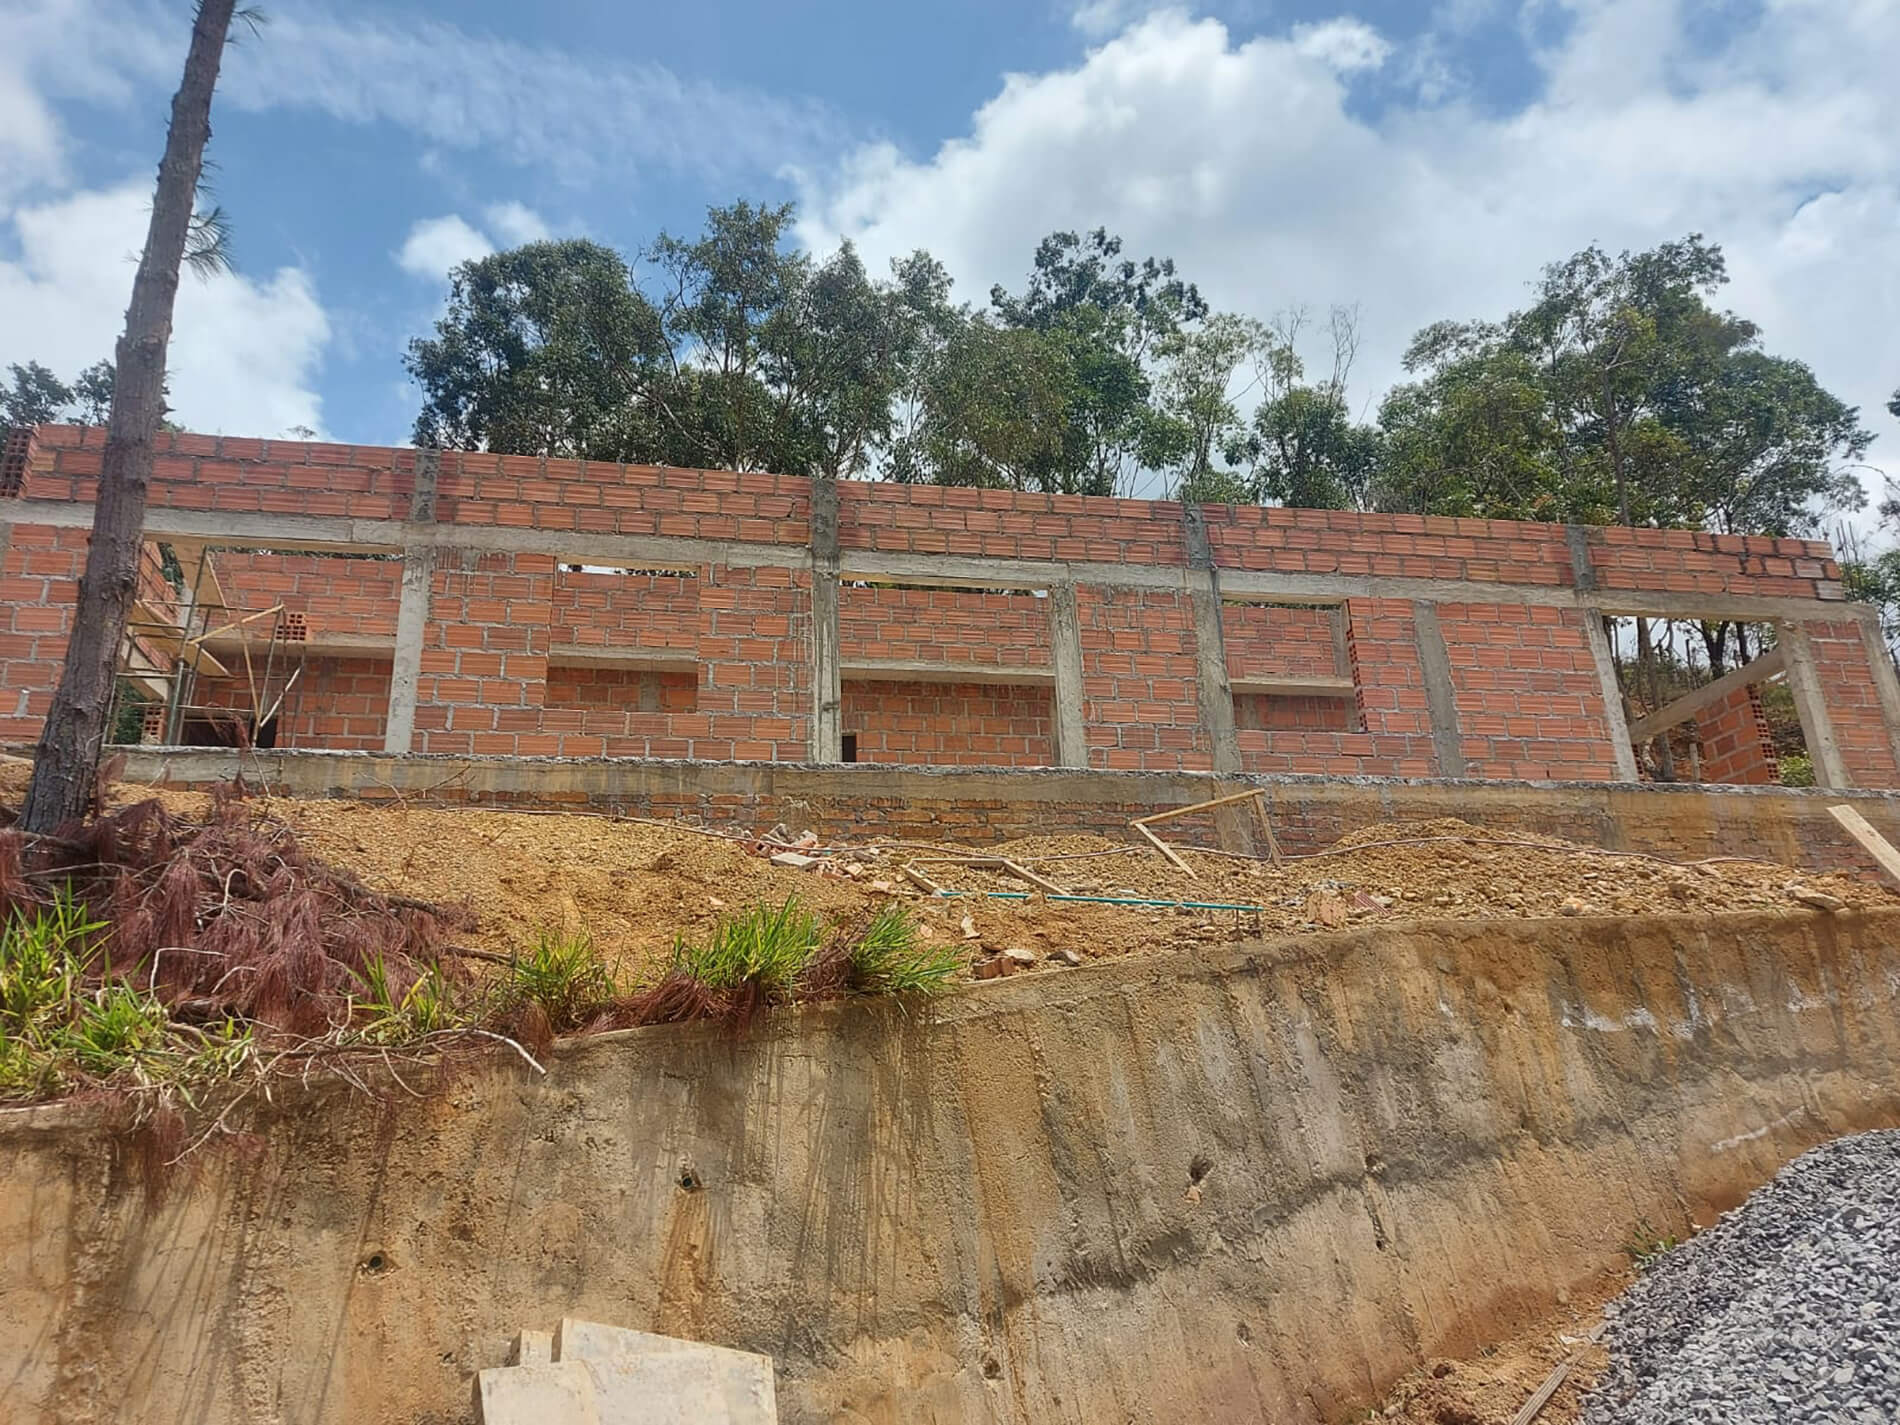 Eco-Retreat Colombia - picture of the brick walls being complete